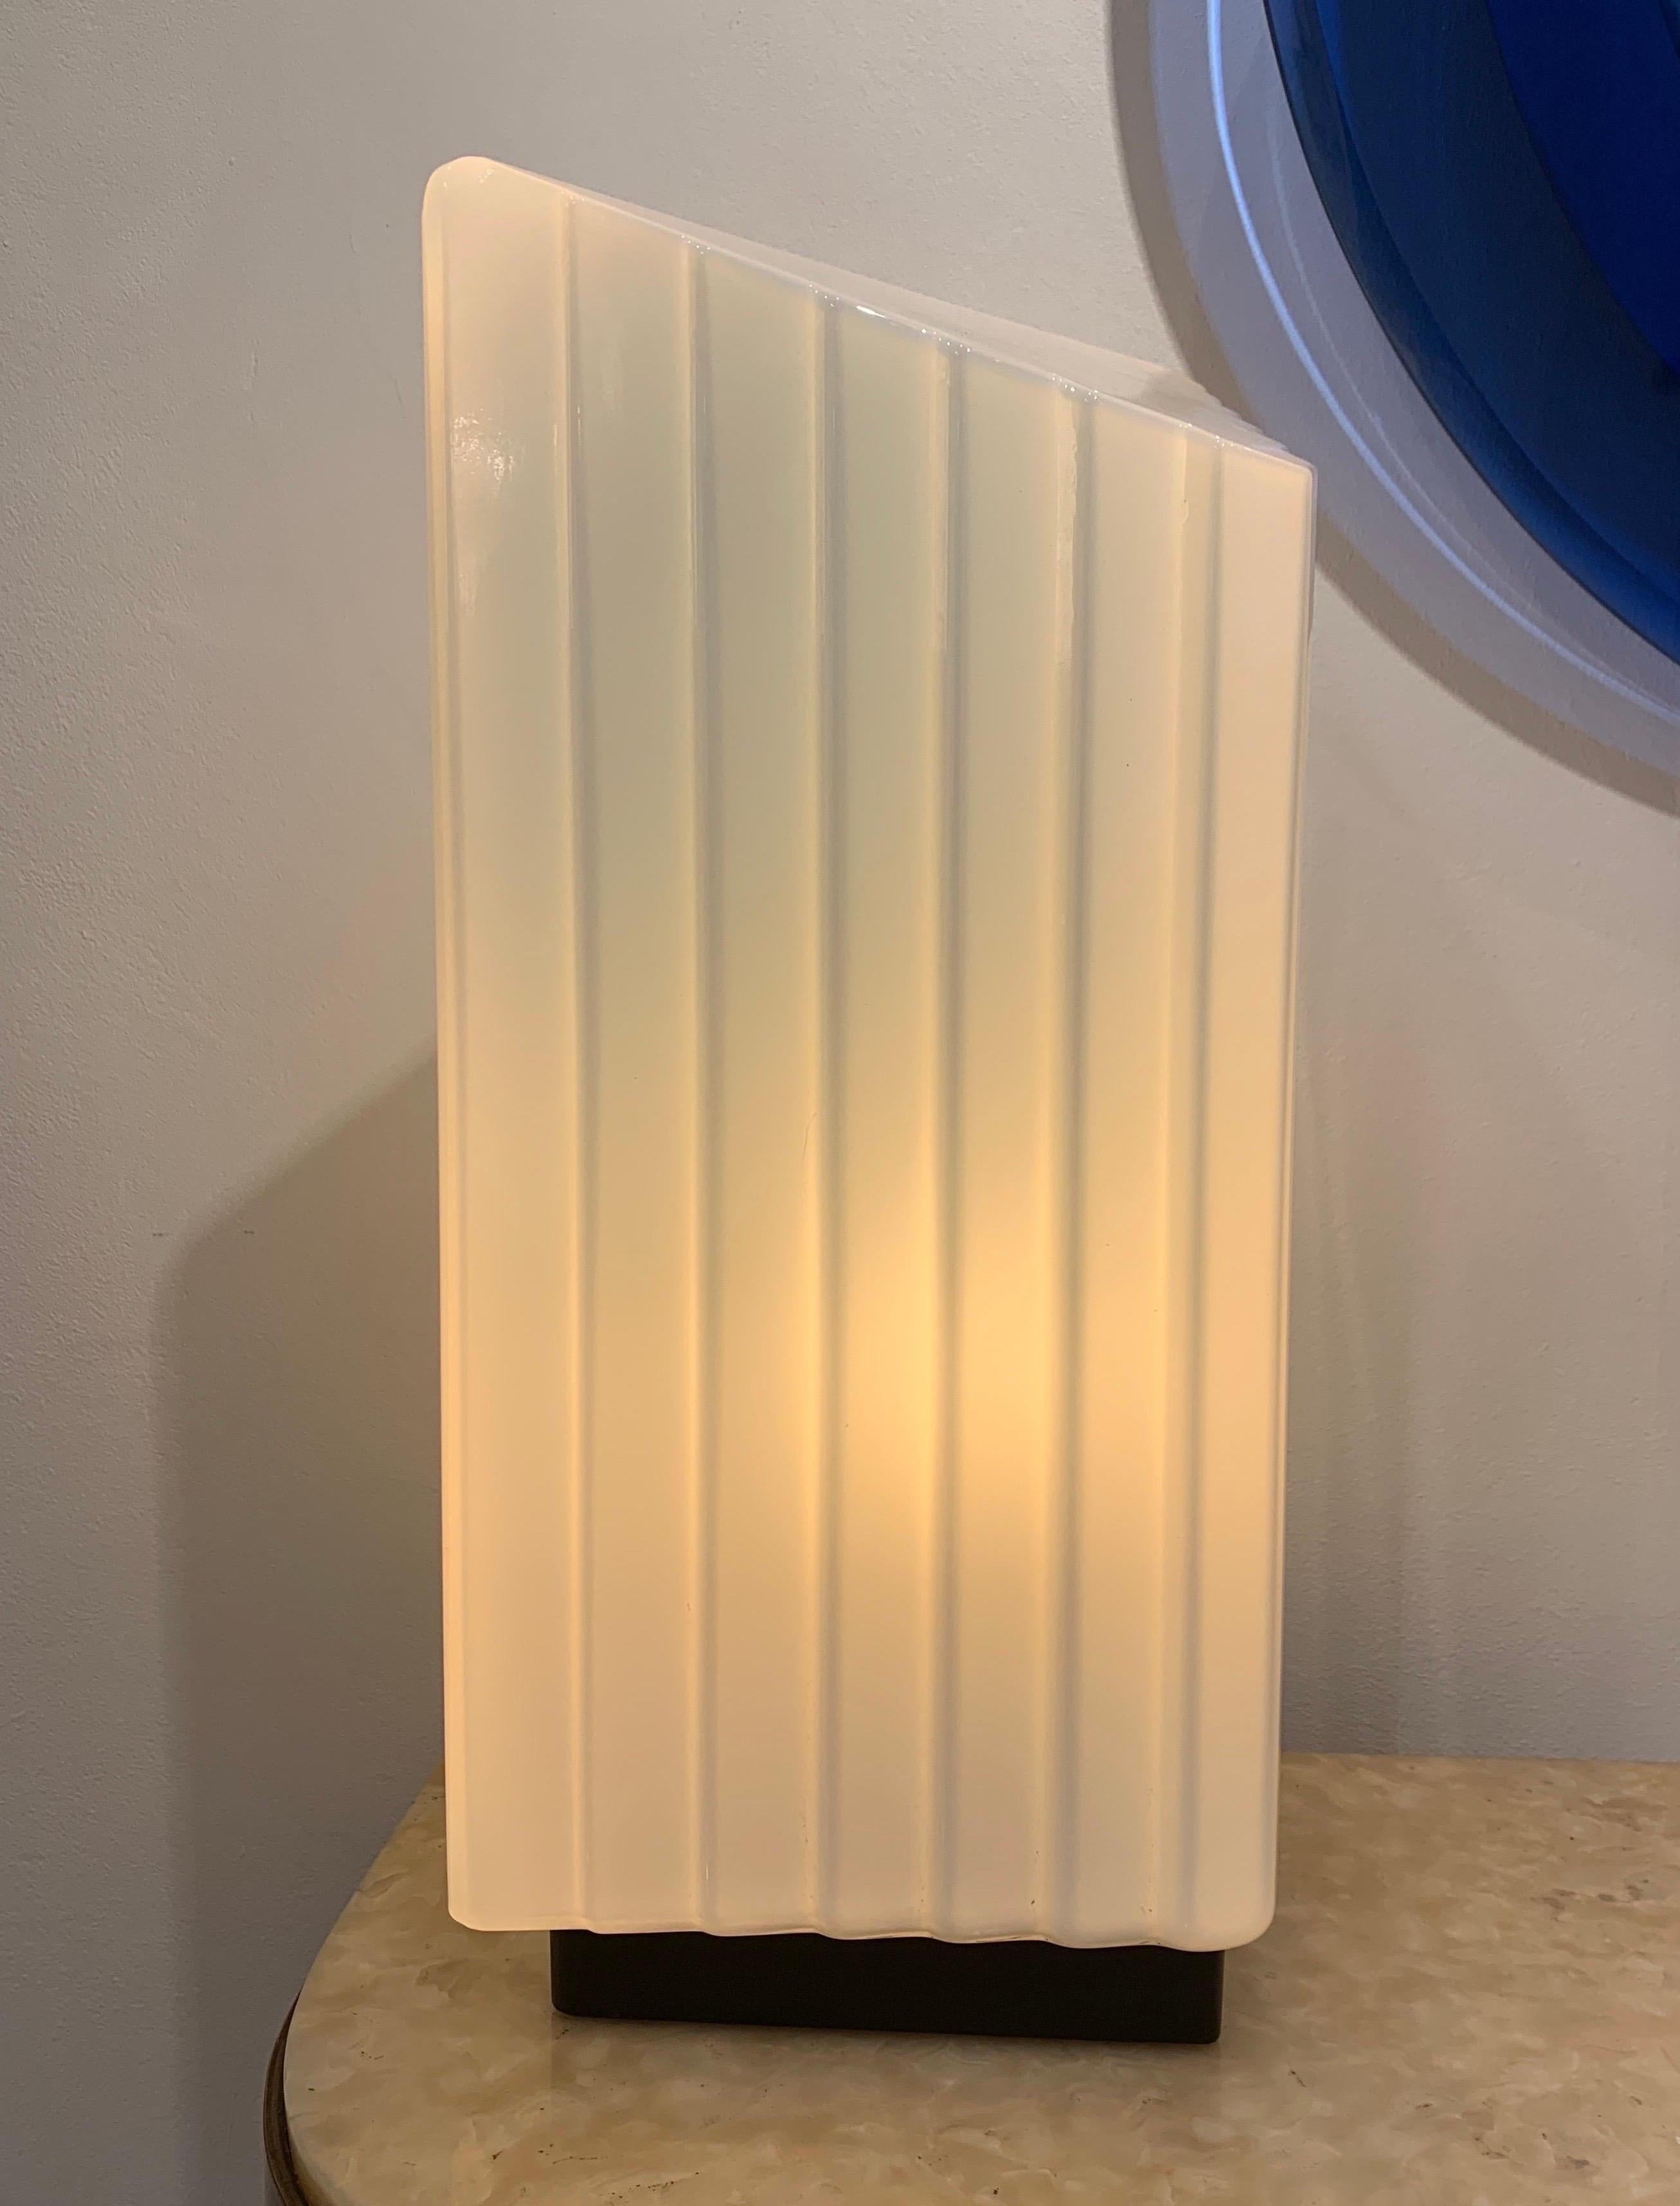 Mazzega is a Murano Glass company founded in 1946. They created design piece of glass, mainly lighting piece with a touch of avant gardiste creativity. The present lamp with its classical style dates circa 1980s.